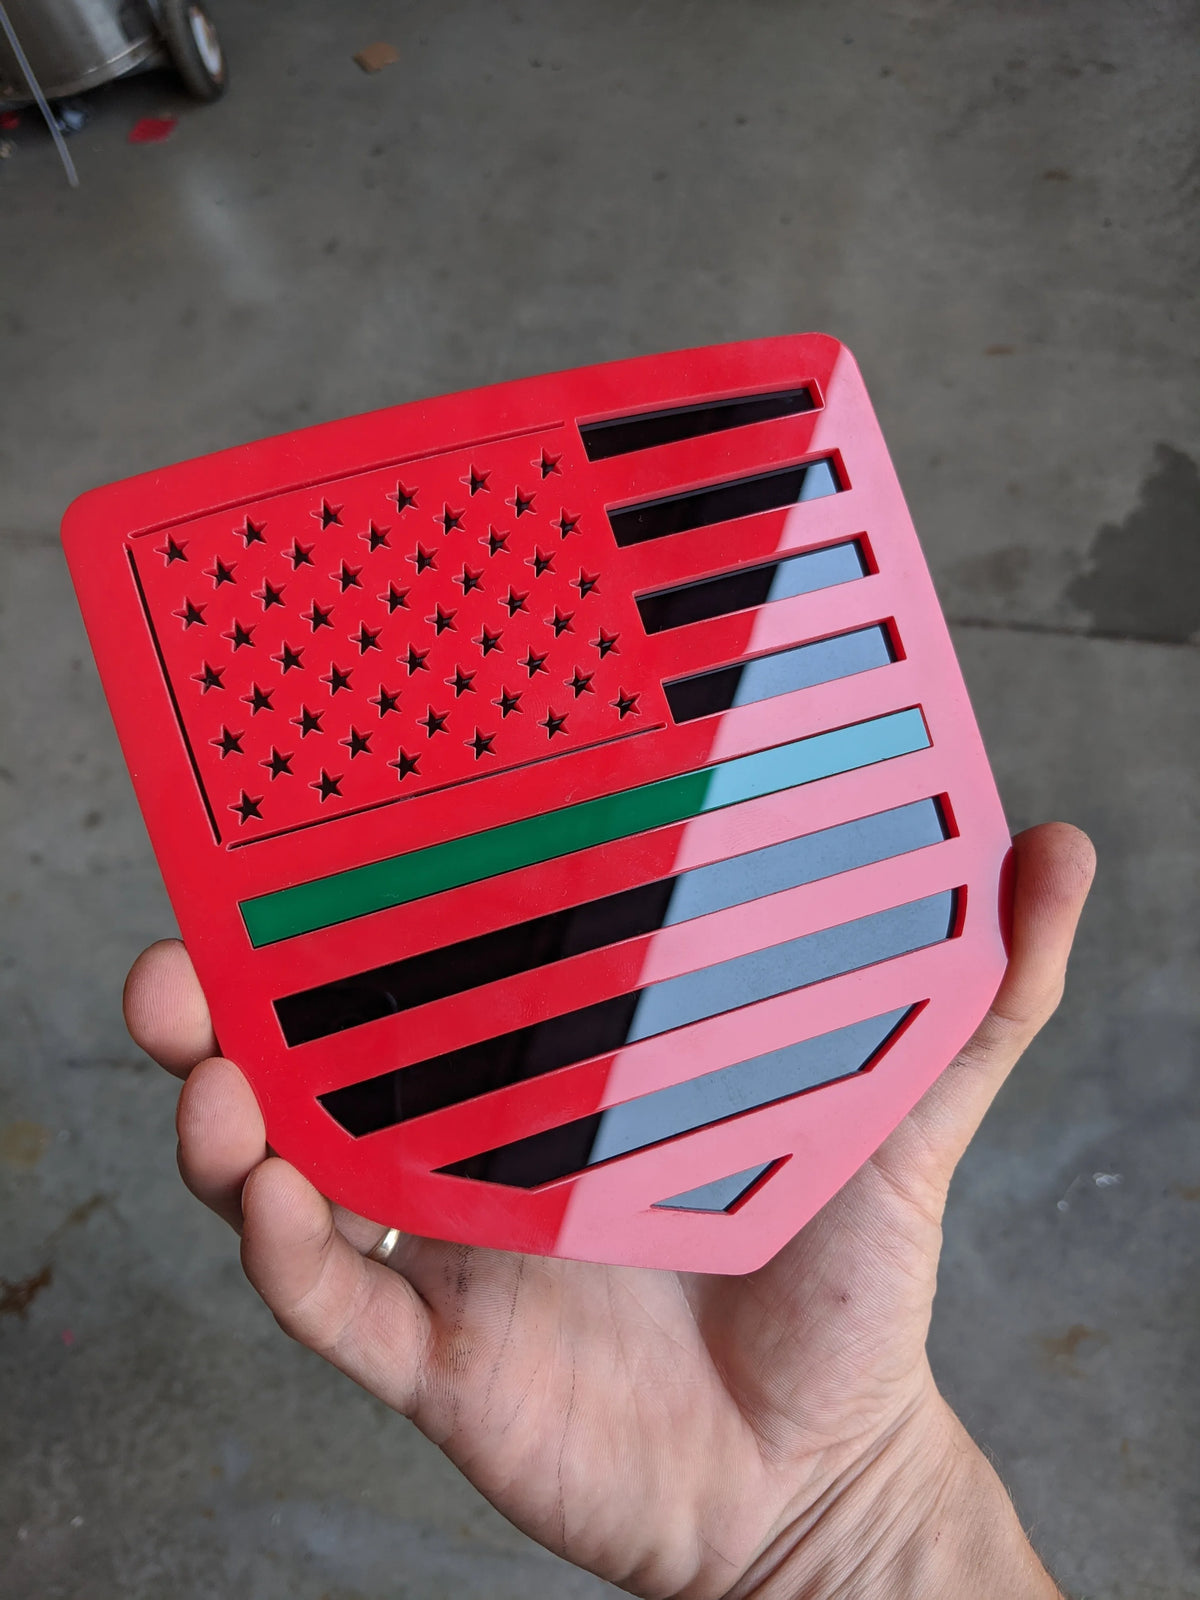 American Flag Badge - Fits 2009-2018 Dodge® Ram® Tailgate -1500, 2500, 3500 - Red on Black with a Thin Green Line